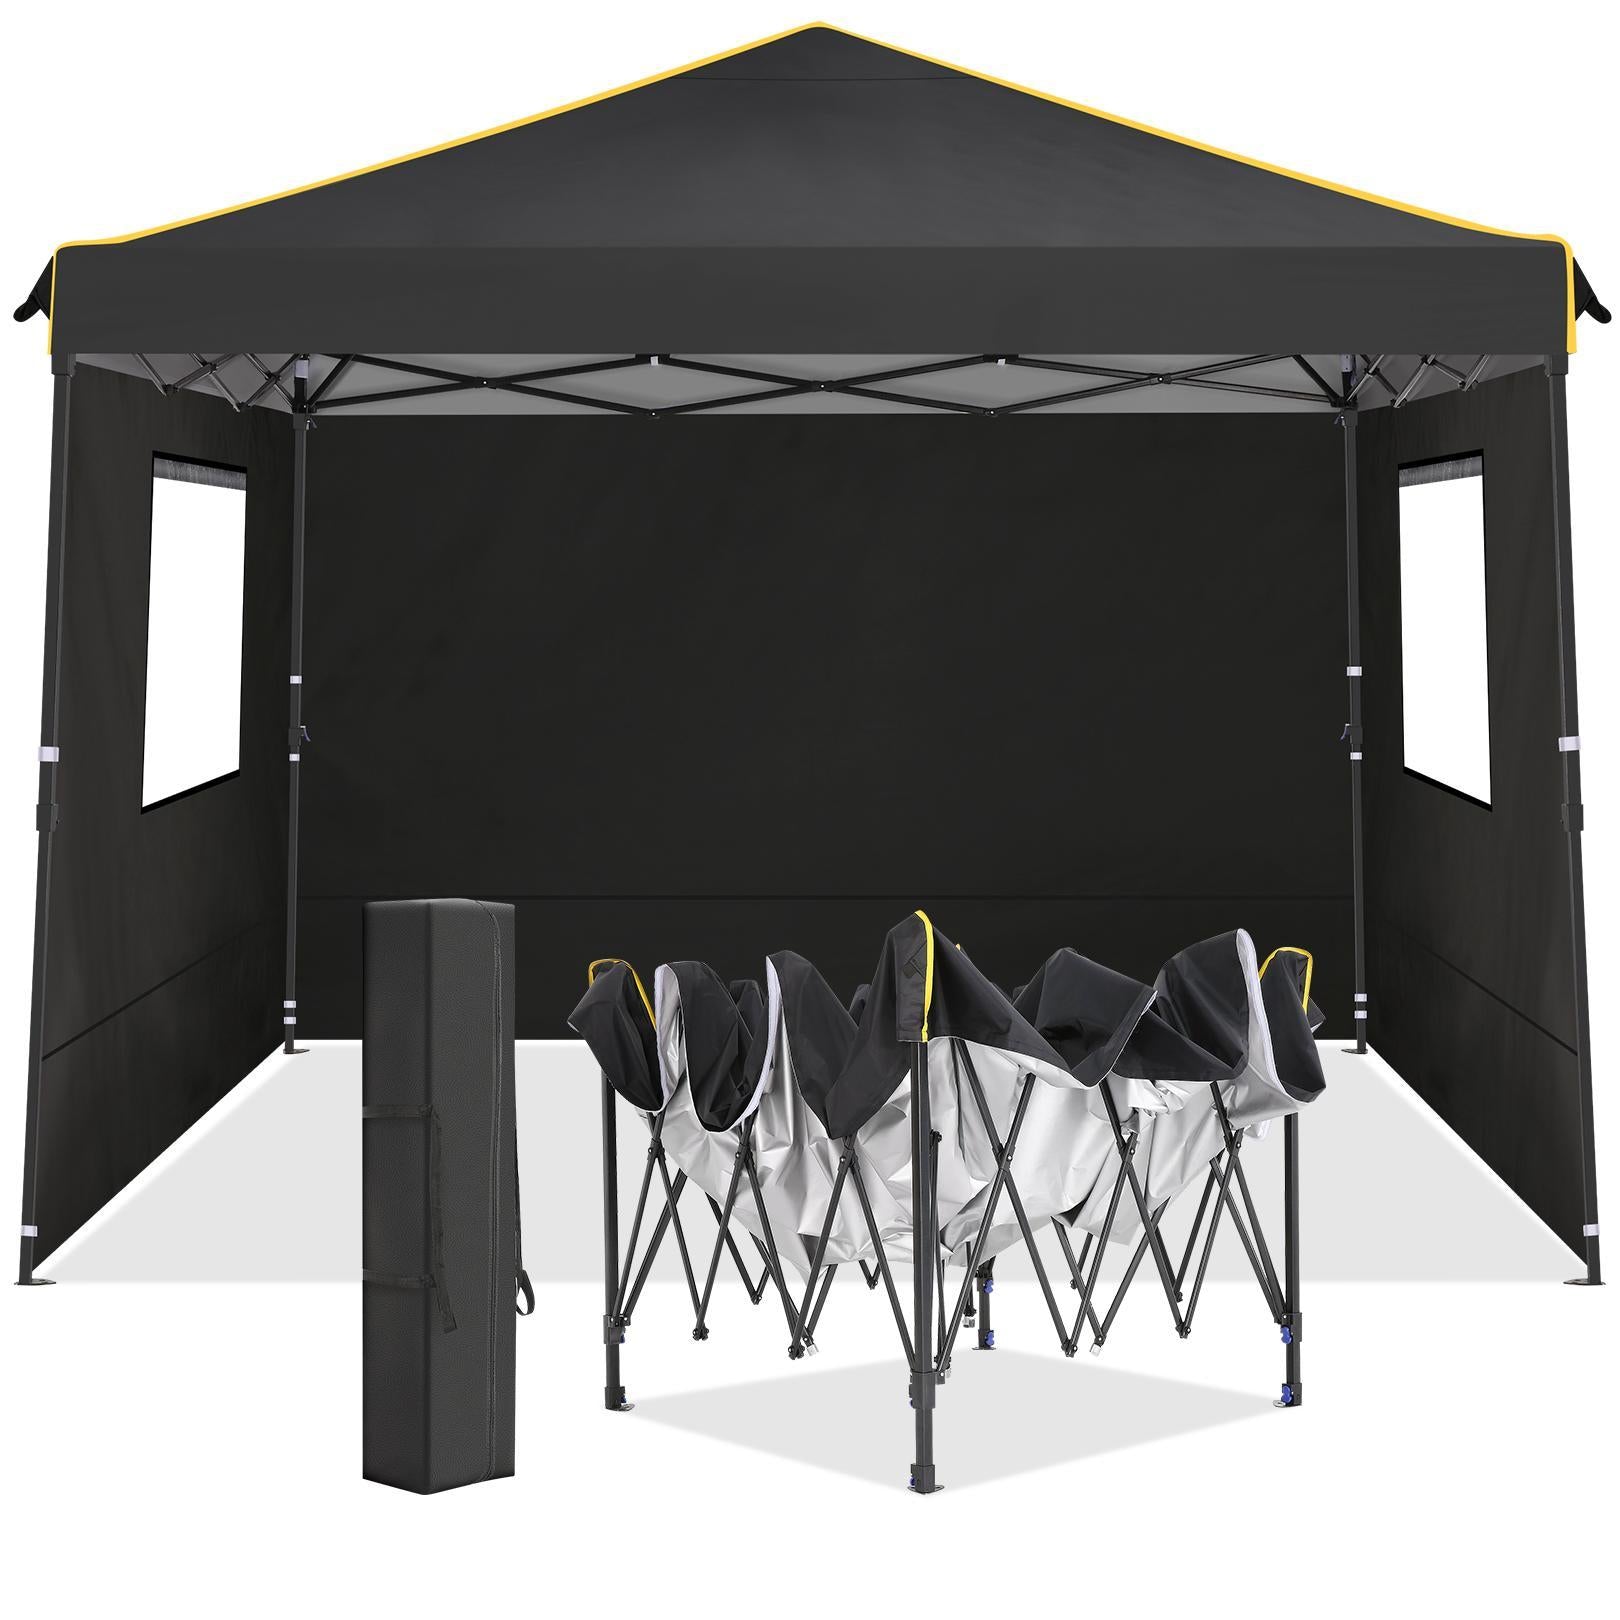 Likein 10x10 ft Pop Up Canopy Tent with 4 Removable Sidewalls, Commercial Instant Gazebo Tent, Outdoor Canopy Tents for Party/Exhibition/Picnic with Carry Bag, Clearance - Black